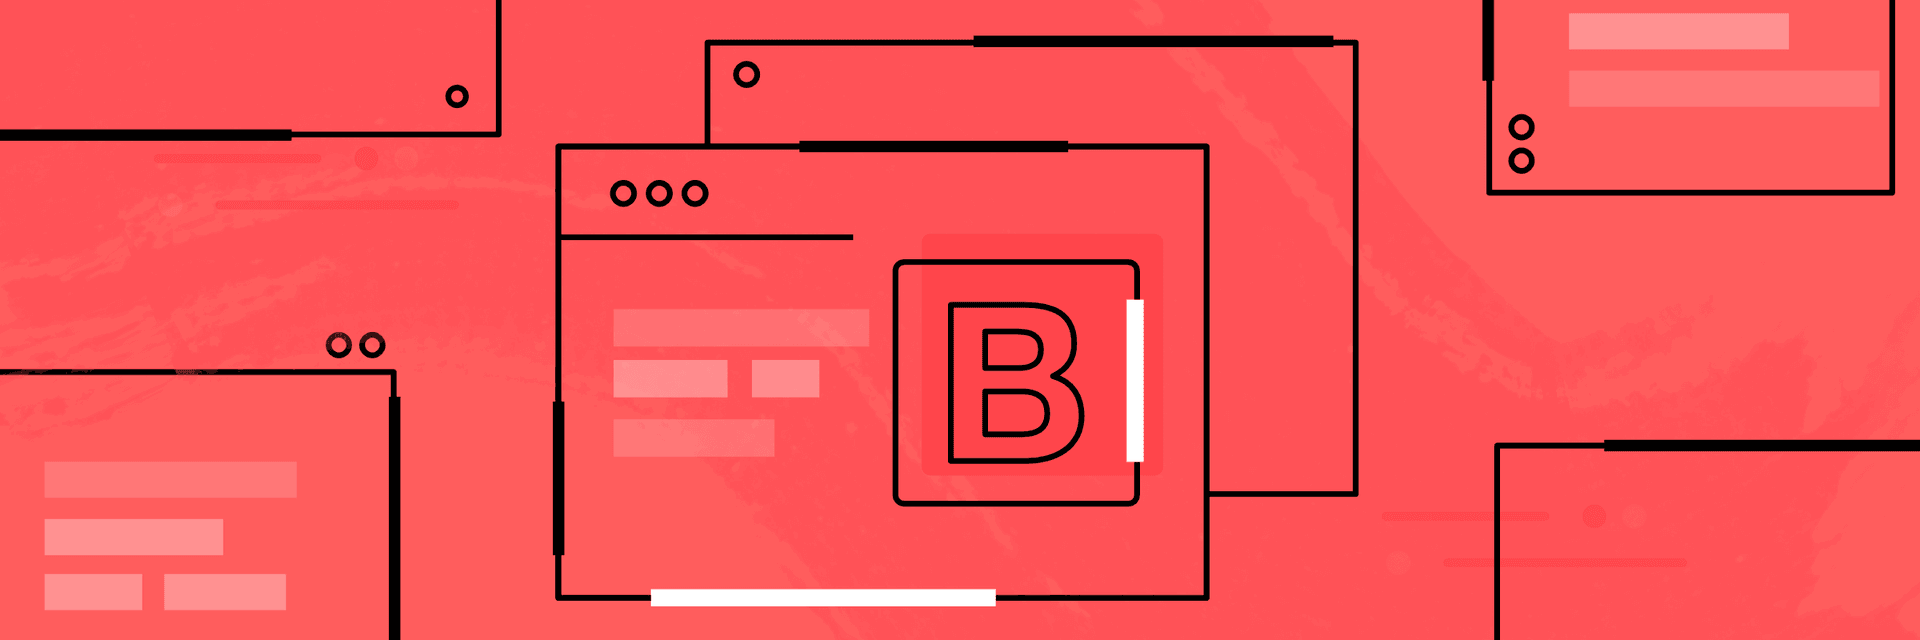 The Impact of Bootstrap on Web Design and Development